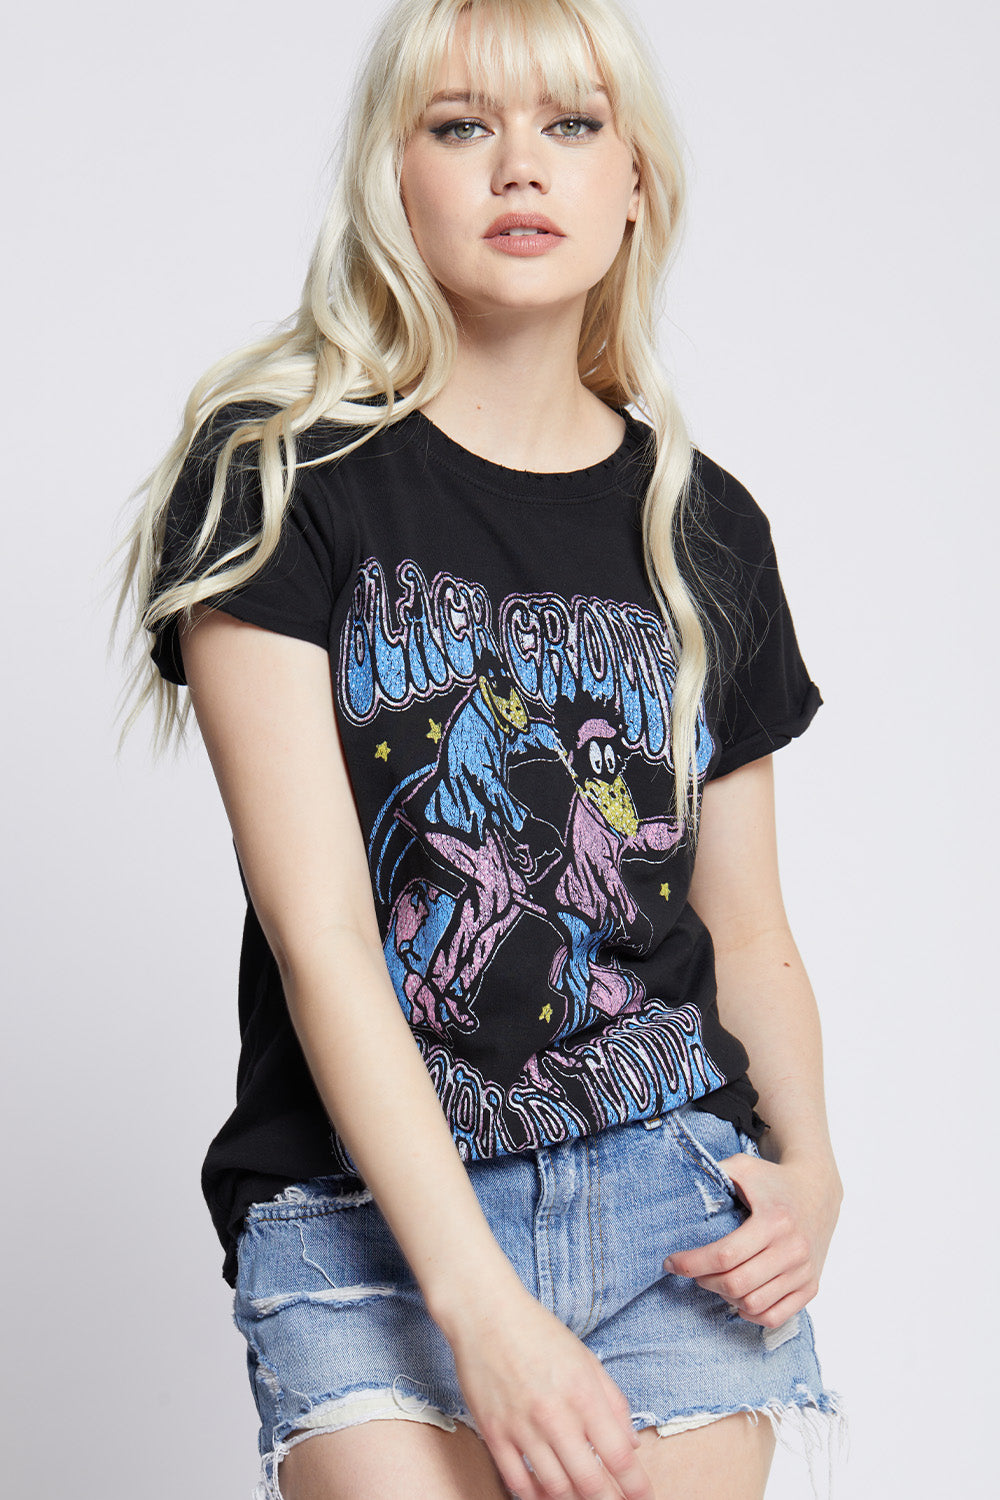 The Black Crowes World Tour Tee